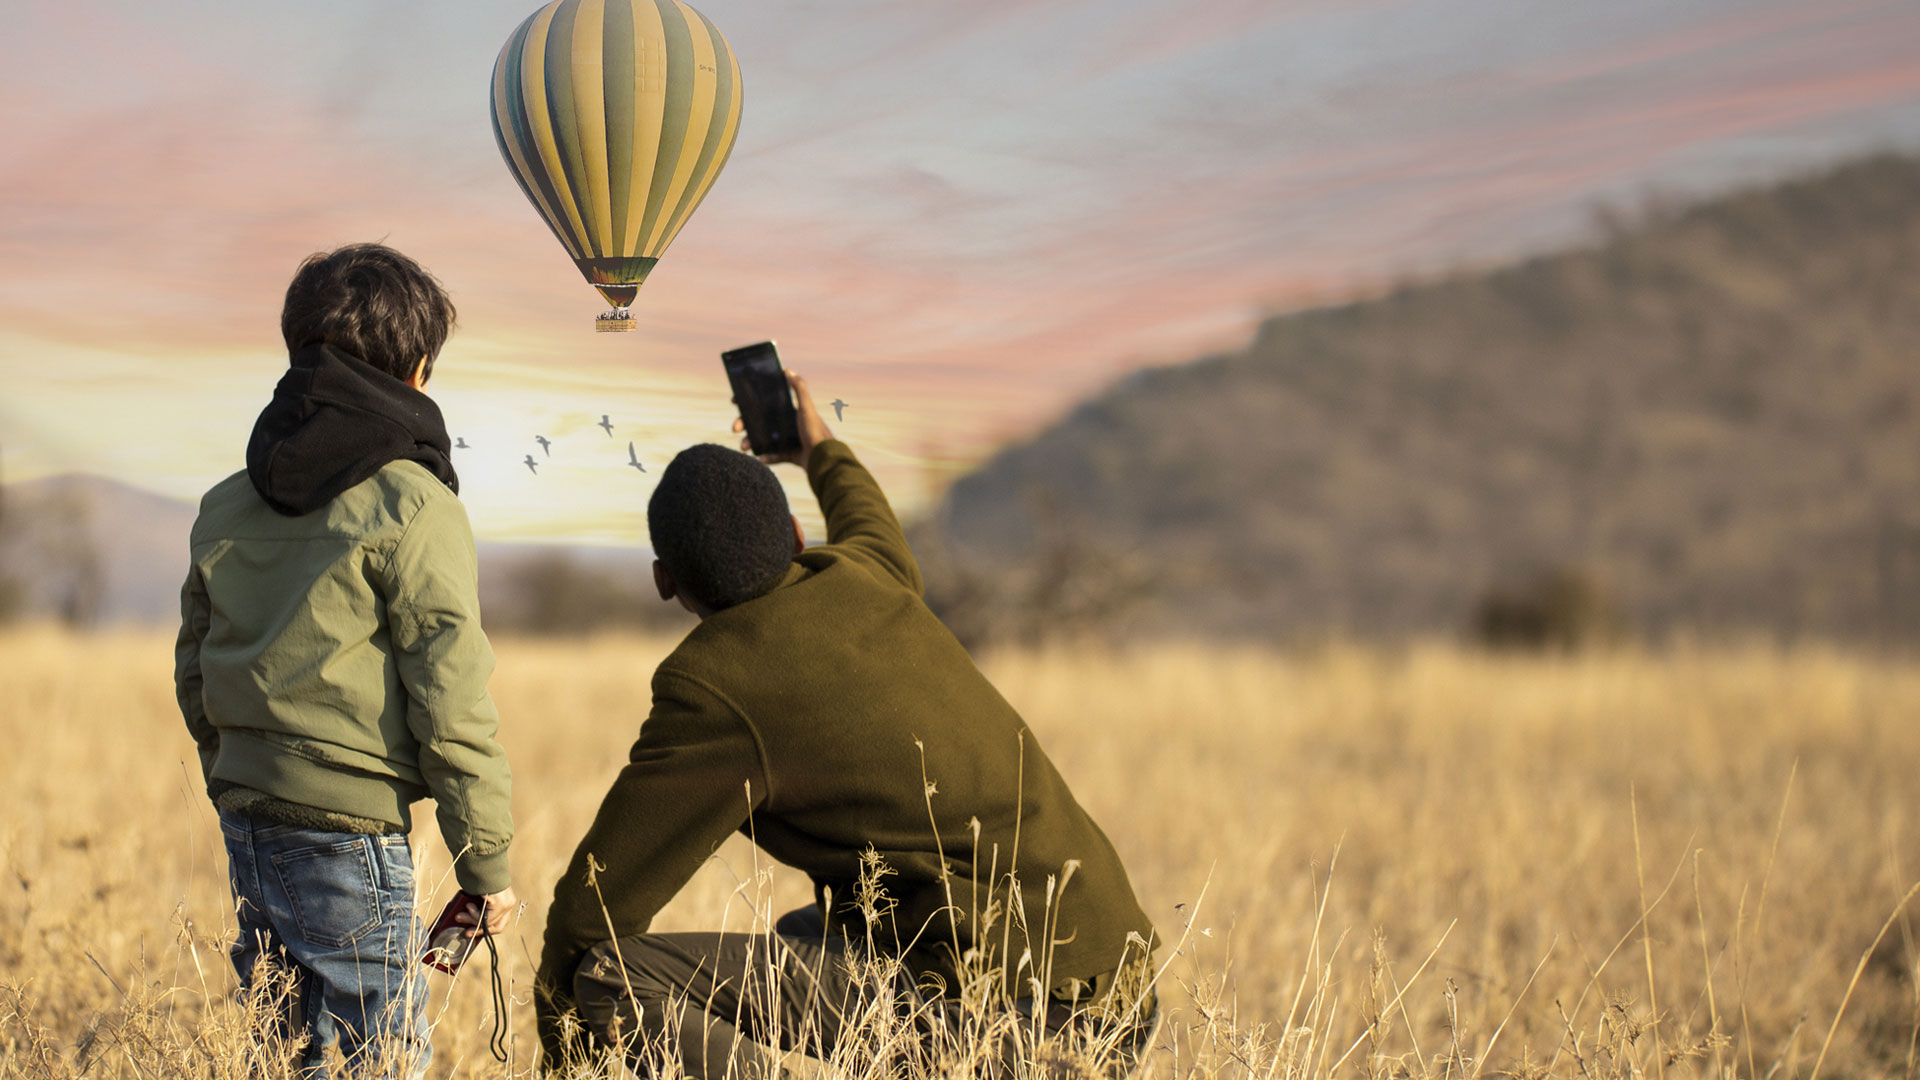 Safari for Family-Father and Son enjoying the view of Hot air Balloon in Serengeti